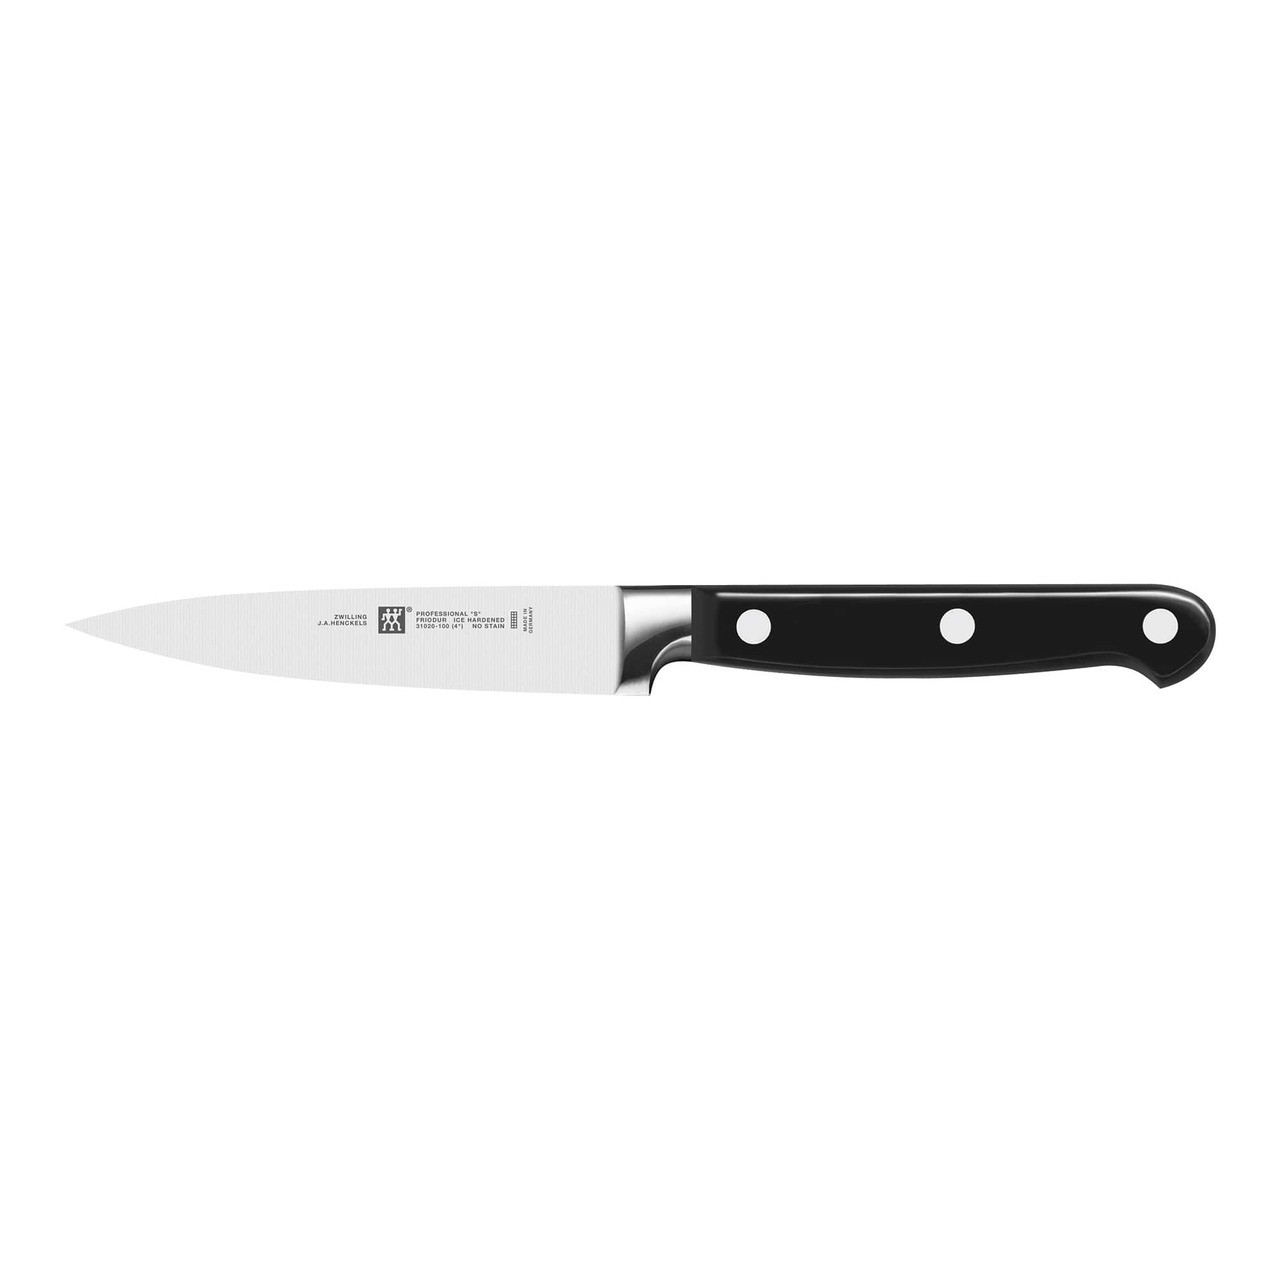 https://cdn11.bigcommerce.com/s-hccytny0od/images/stencil/1280x1280/products/618/718/zwilling-ja-henckels-professional-s-4-inch-paring-knife__85171.1509663994.jpg?c=2?imbypass=on